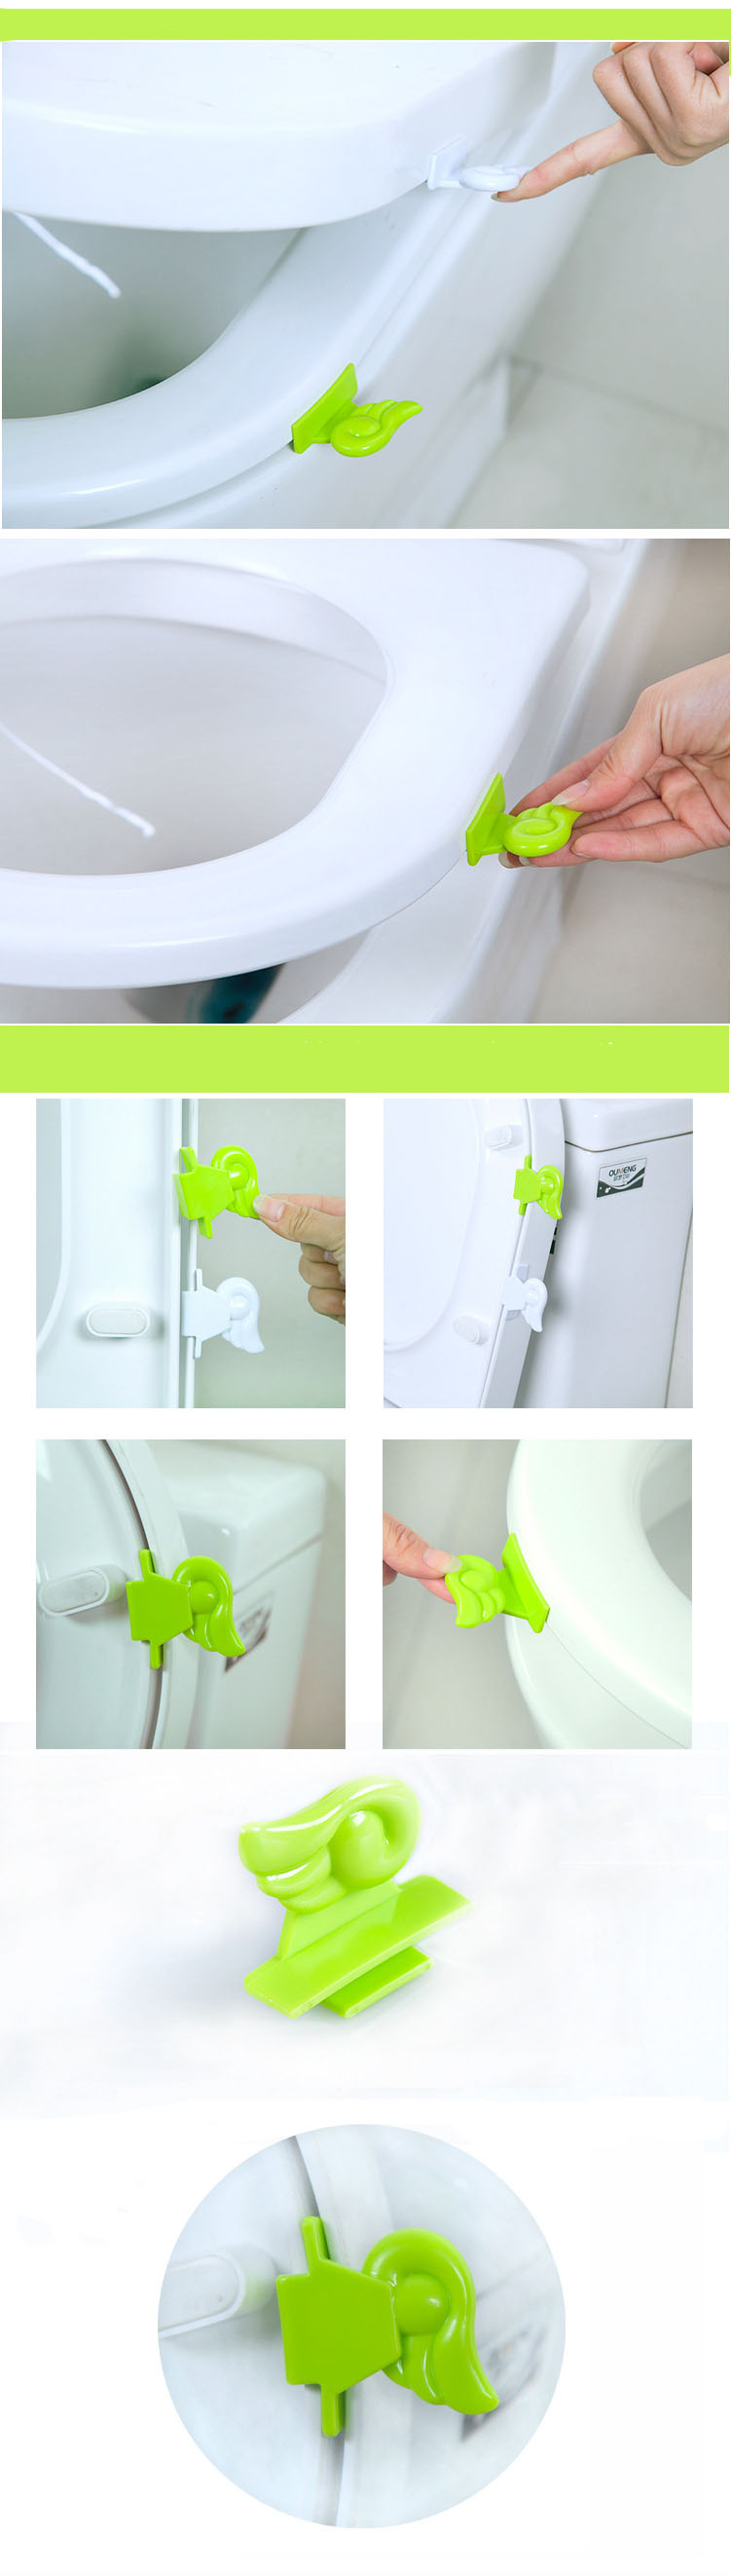 Honana-Bathroom-Cute-Wing-Shape-2-Color-Options-Toilet-Seat-Cover-Lifting-Device-Clamp-Lifter-1297648-2